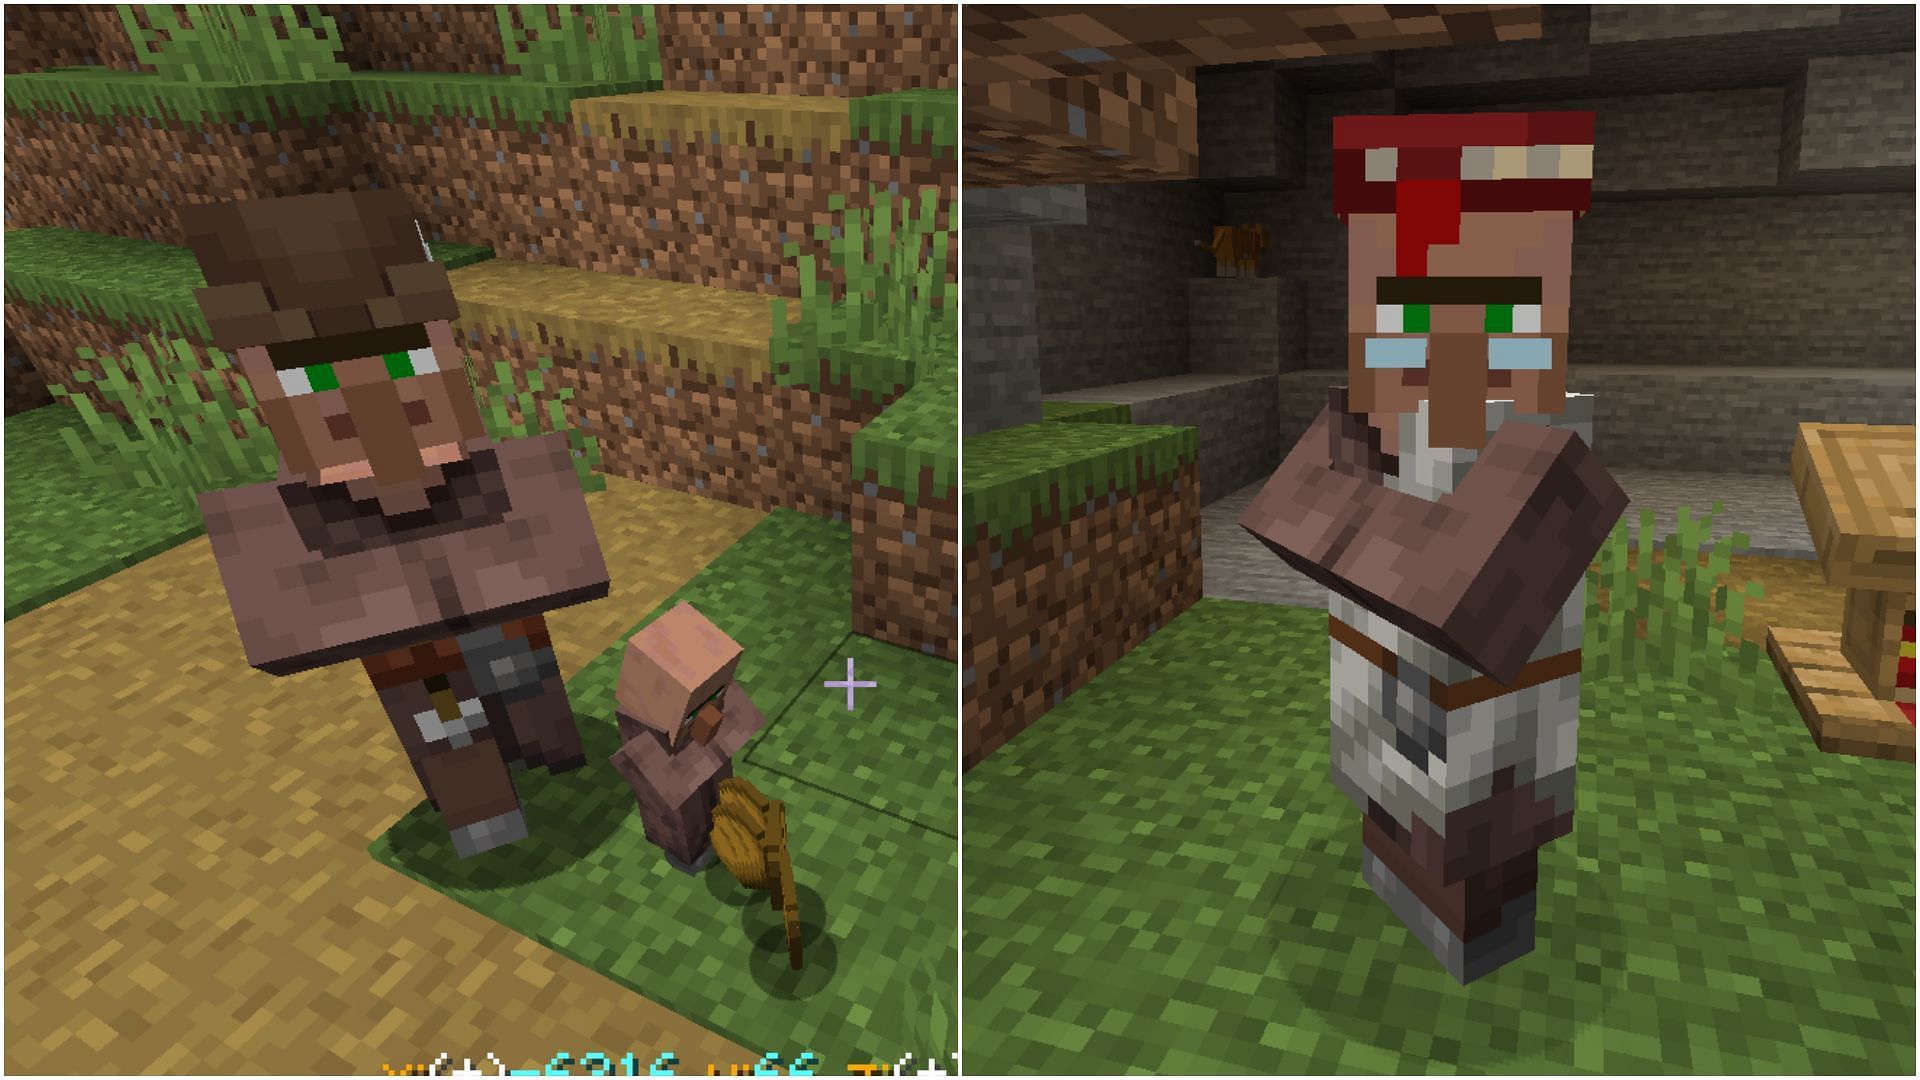 There are several great trades from villagers in Minecraft (Image via Mojang)